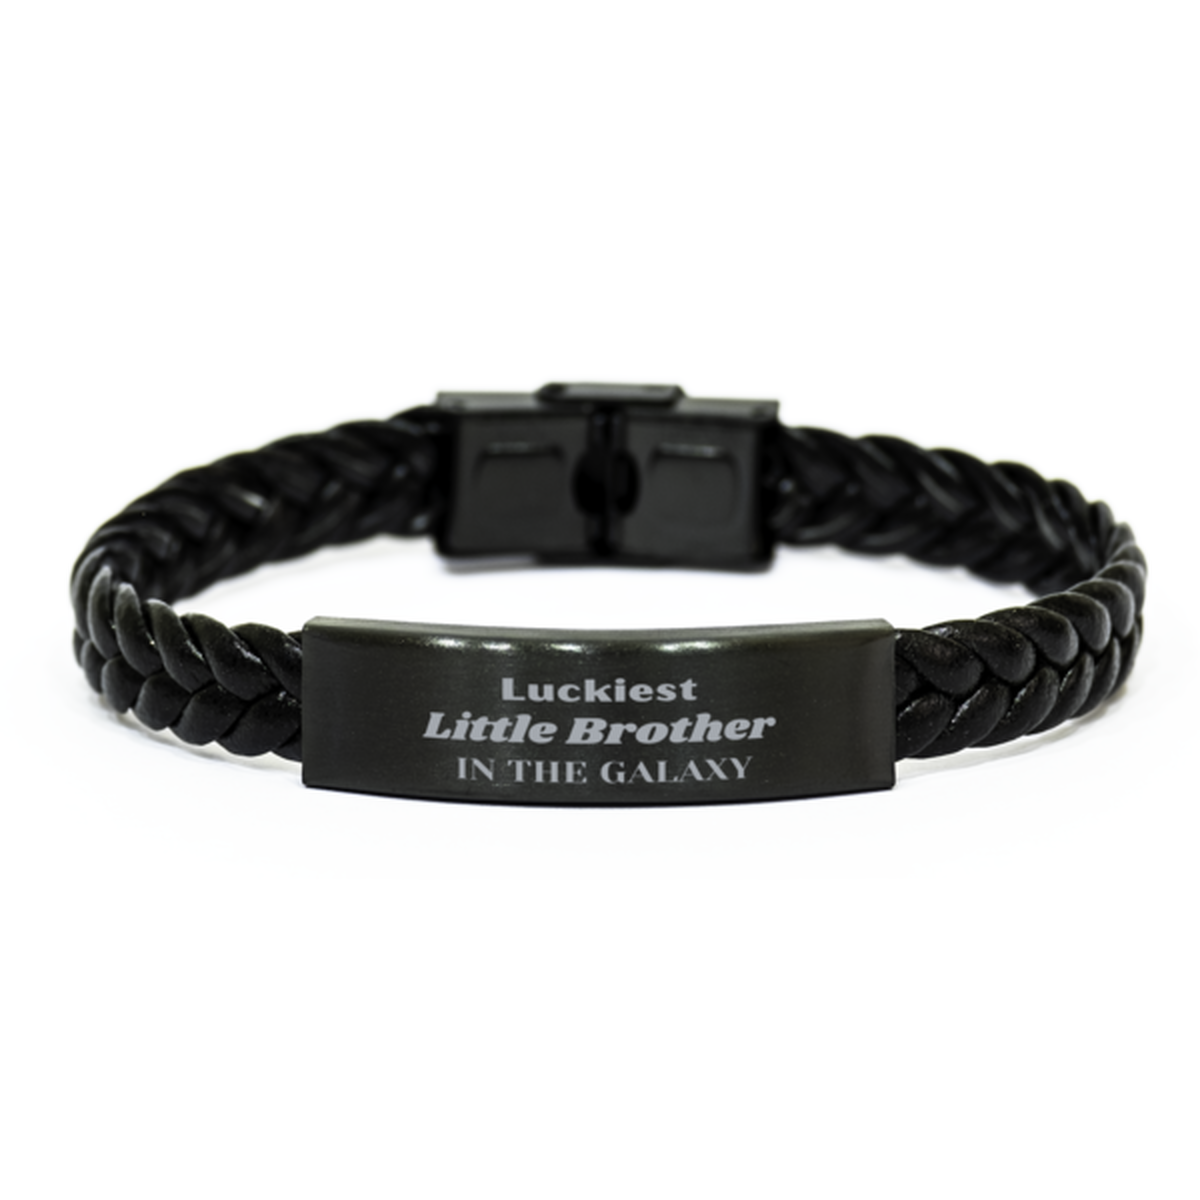 Luckiest Little Brother in the Galaxy, To My Little Brother Engraved Gifts, Christmas Little Brother Braided Leather Bracelet Gifts, X-mas Birthday Unique Gifts For Little Brother Men Women